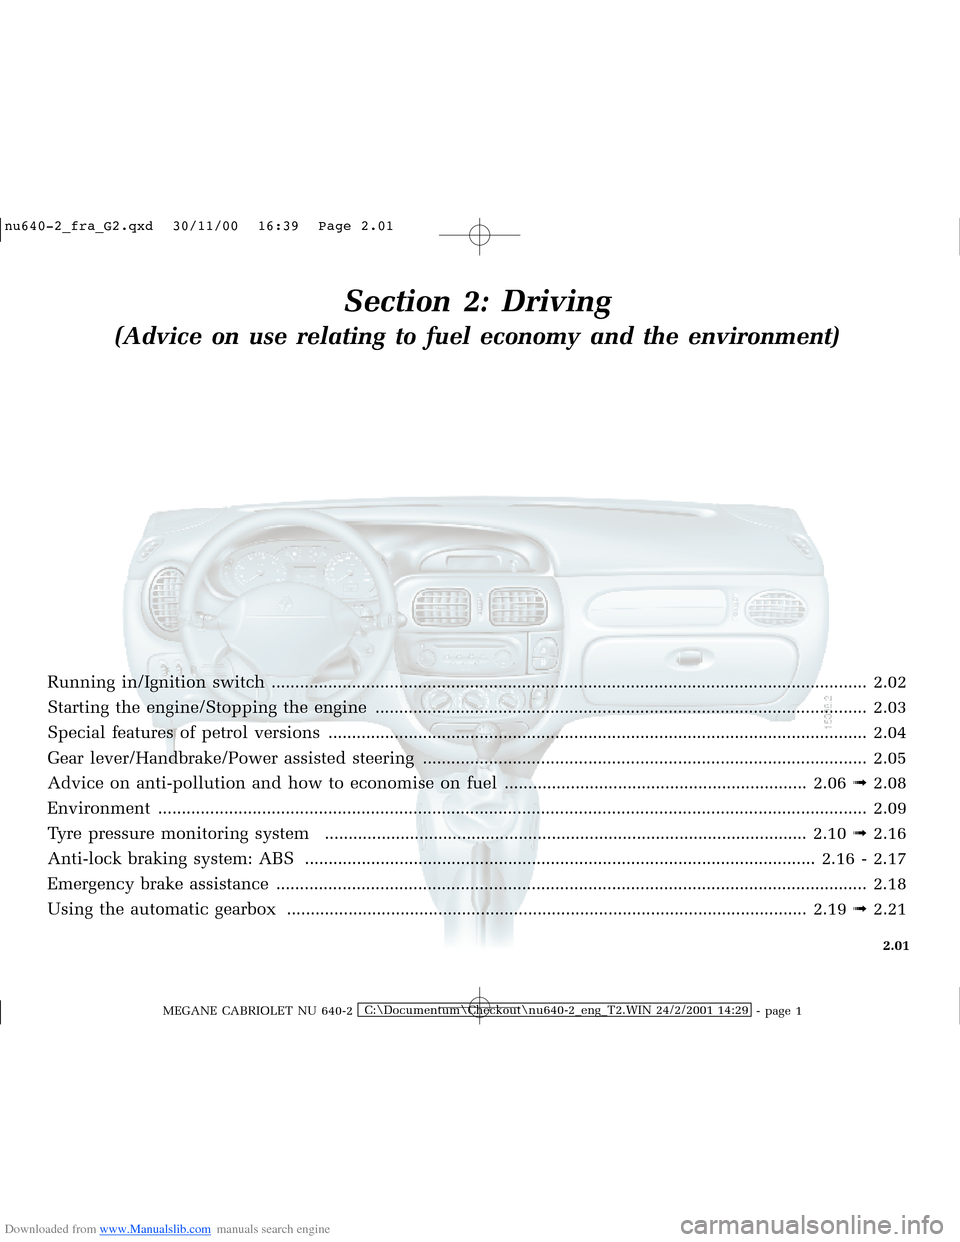 RENAULT MEGANE 2000 X64 / 1.G Workshop Manual Downloaded from www.Manualslib.com manuals search engine �Q�X������B�I�U�D�B�*���T�[�G� � ��������� � ������ � �3�D�J�H� ����
MEGANE CABRIOLET NU 640-2C:\Documentum\Chec